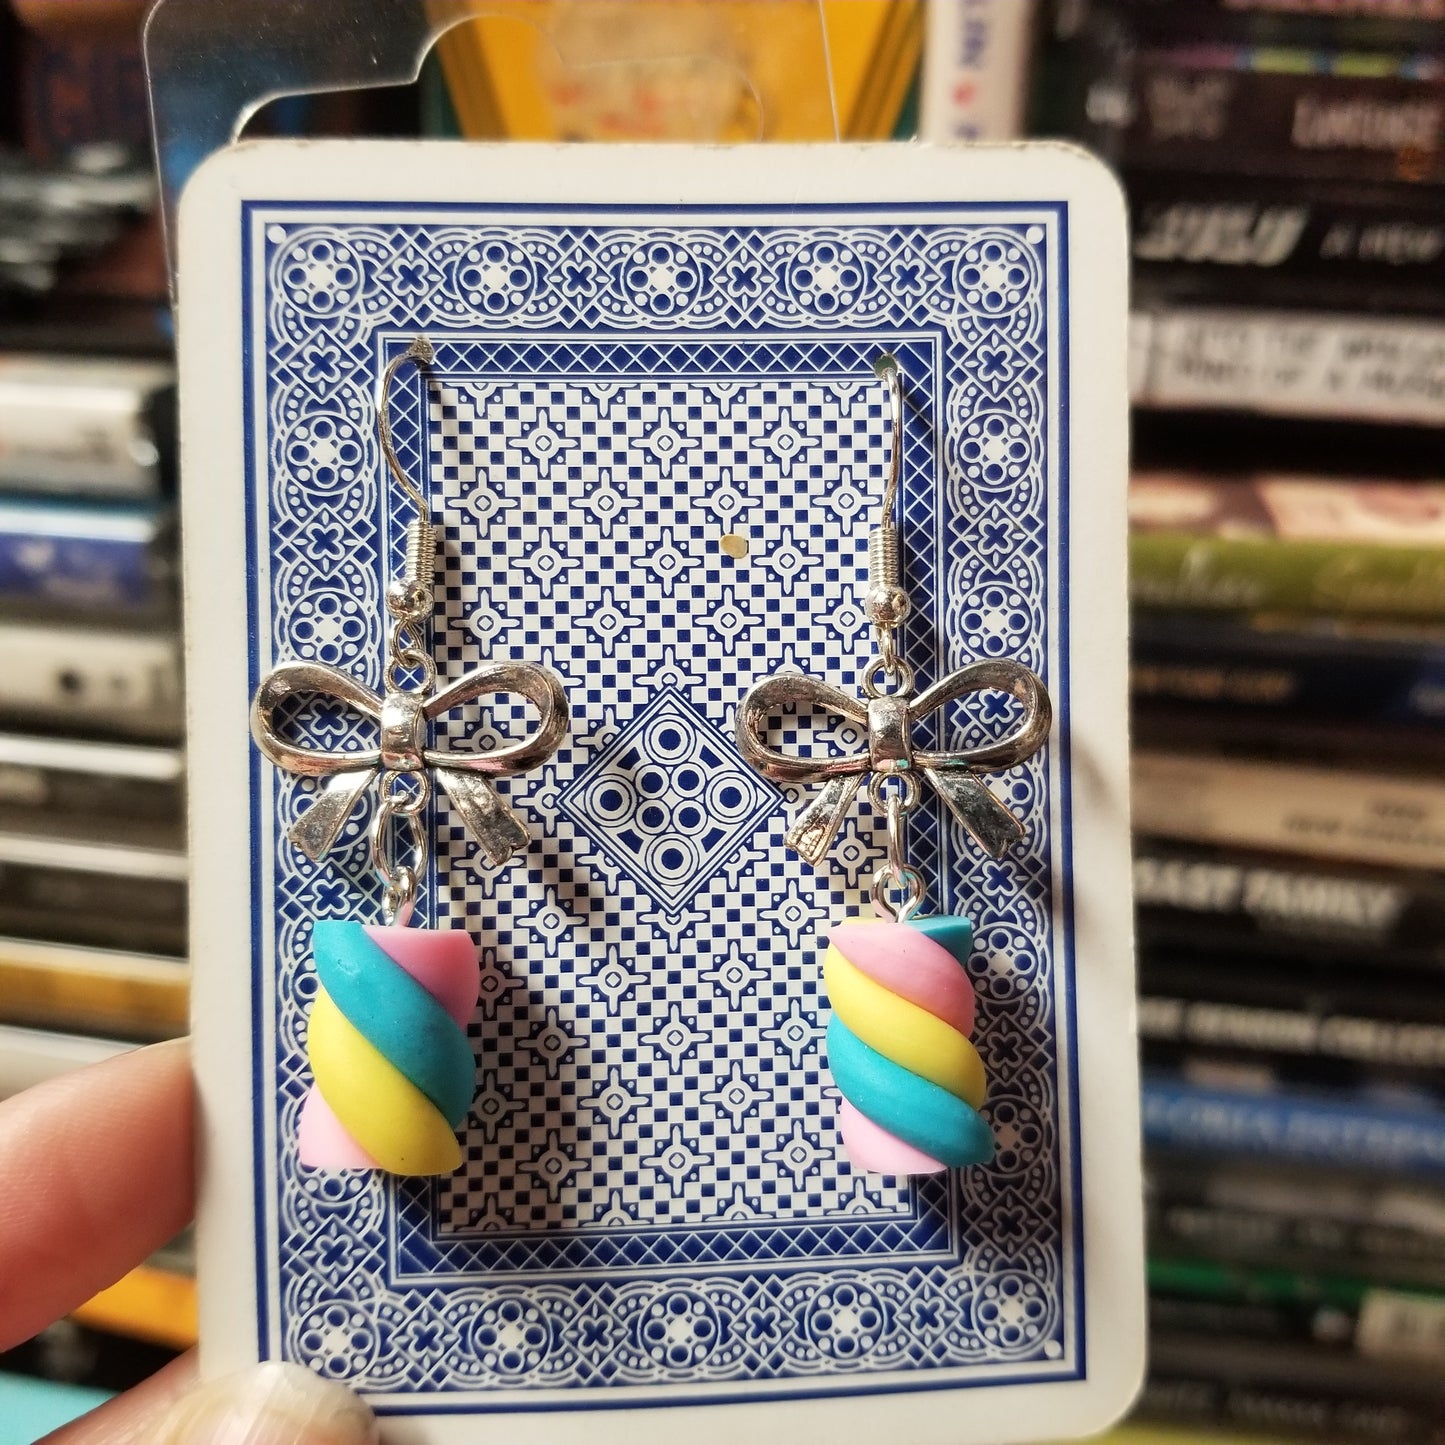 Swirly Candy and Bows EARRINGS by Skullduggery Studio